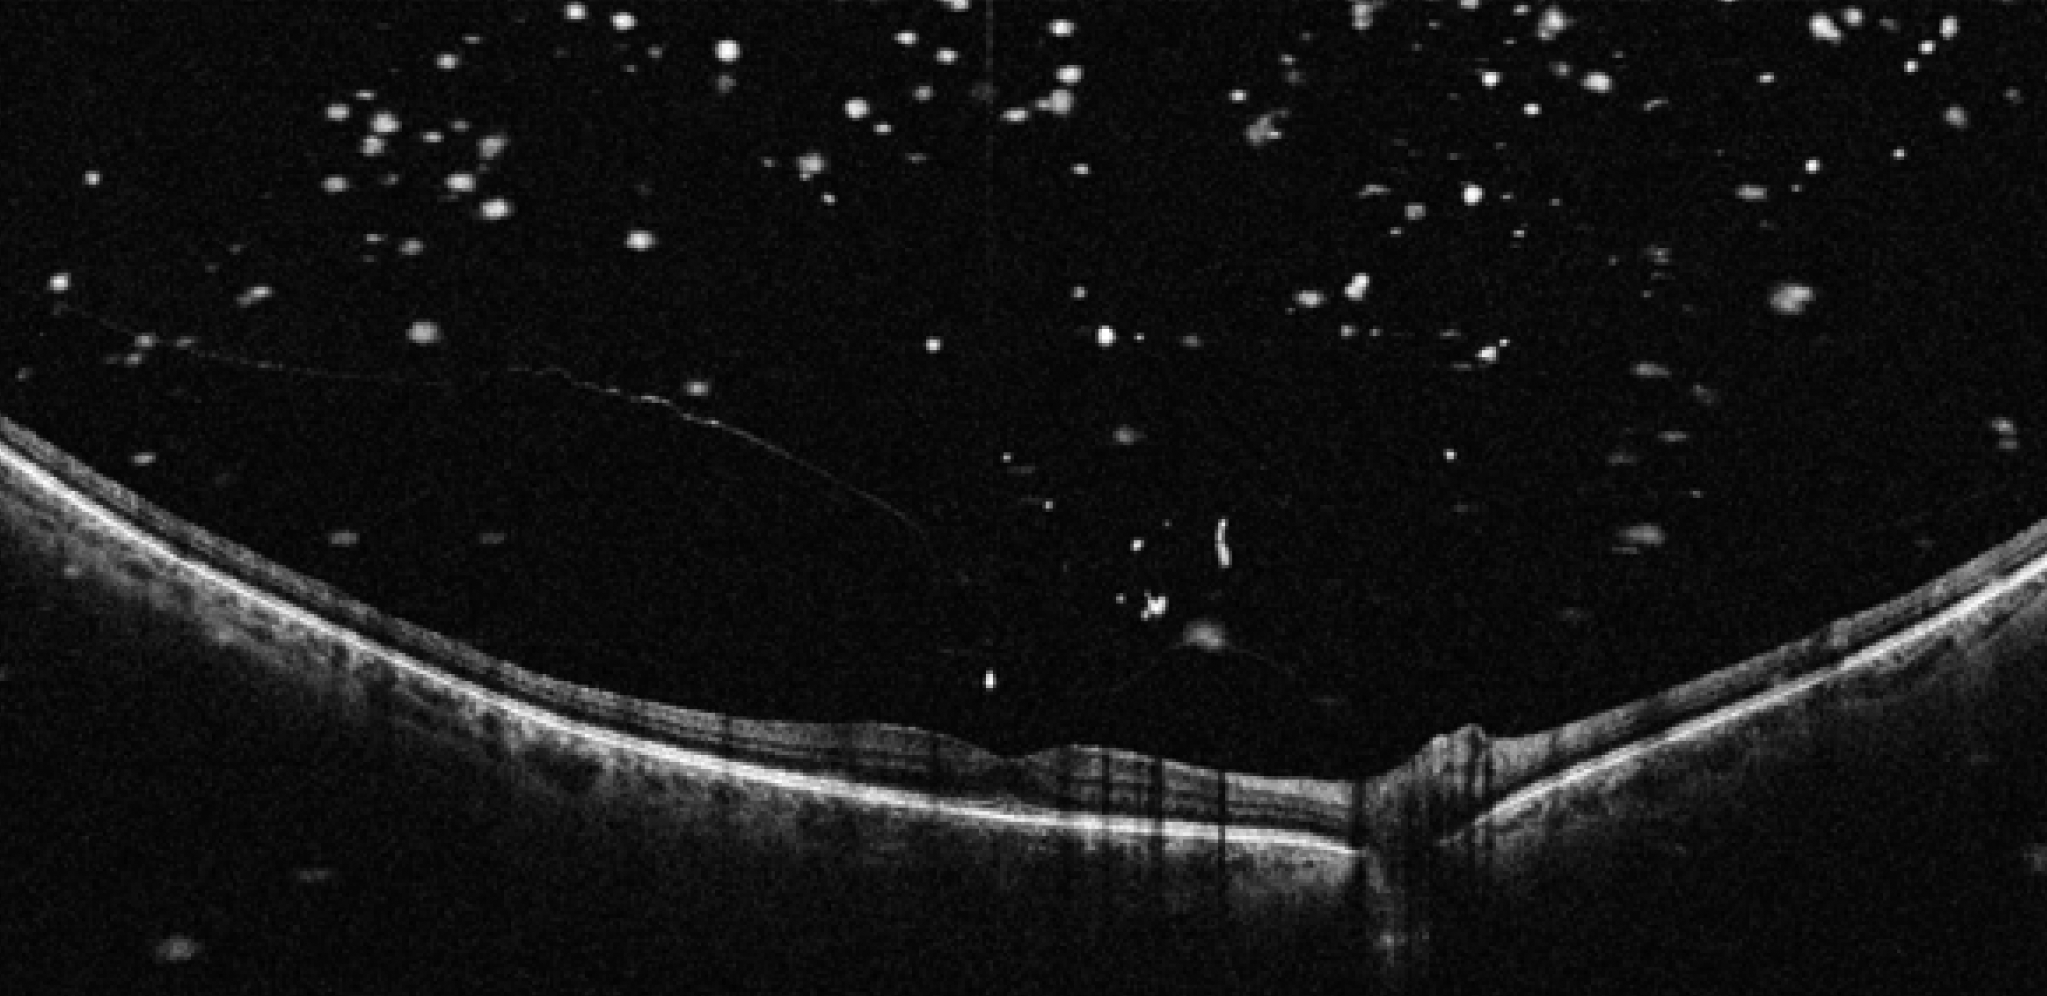 Posterior vitreous opacity and vitreomacular traction in a patient with with subfoveal outer lamellar macular hole and initial foveal schisis.